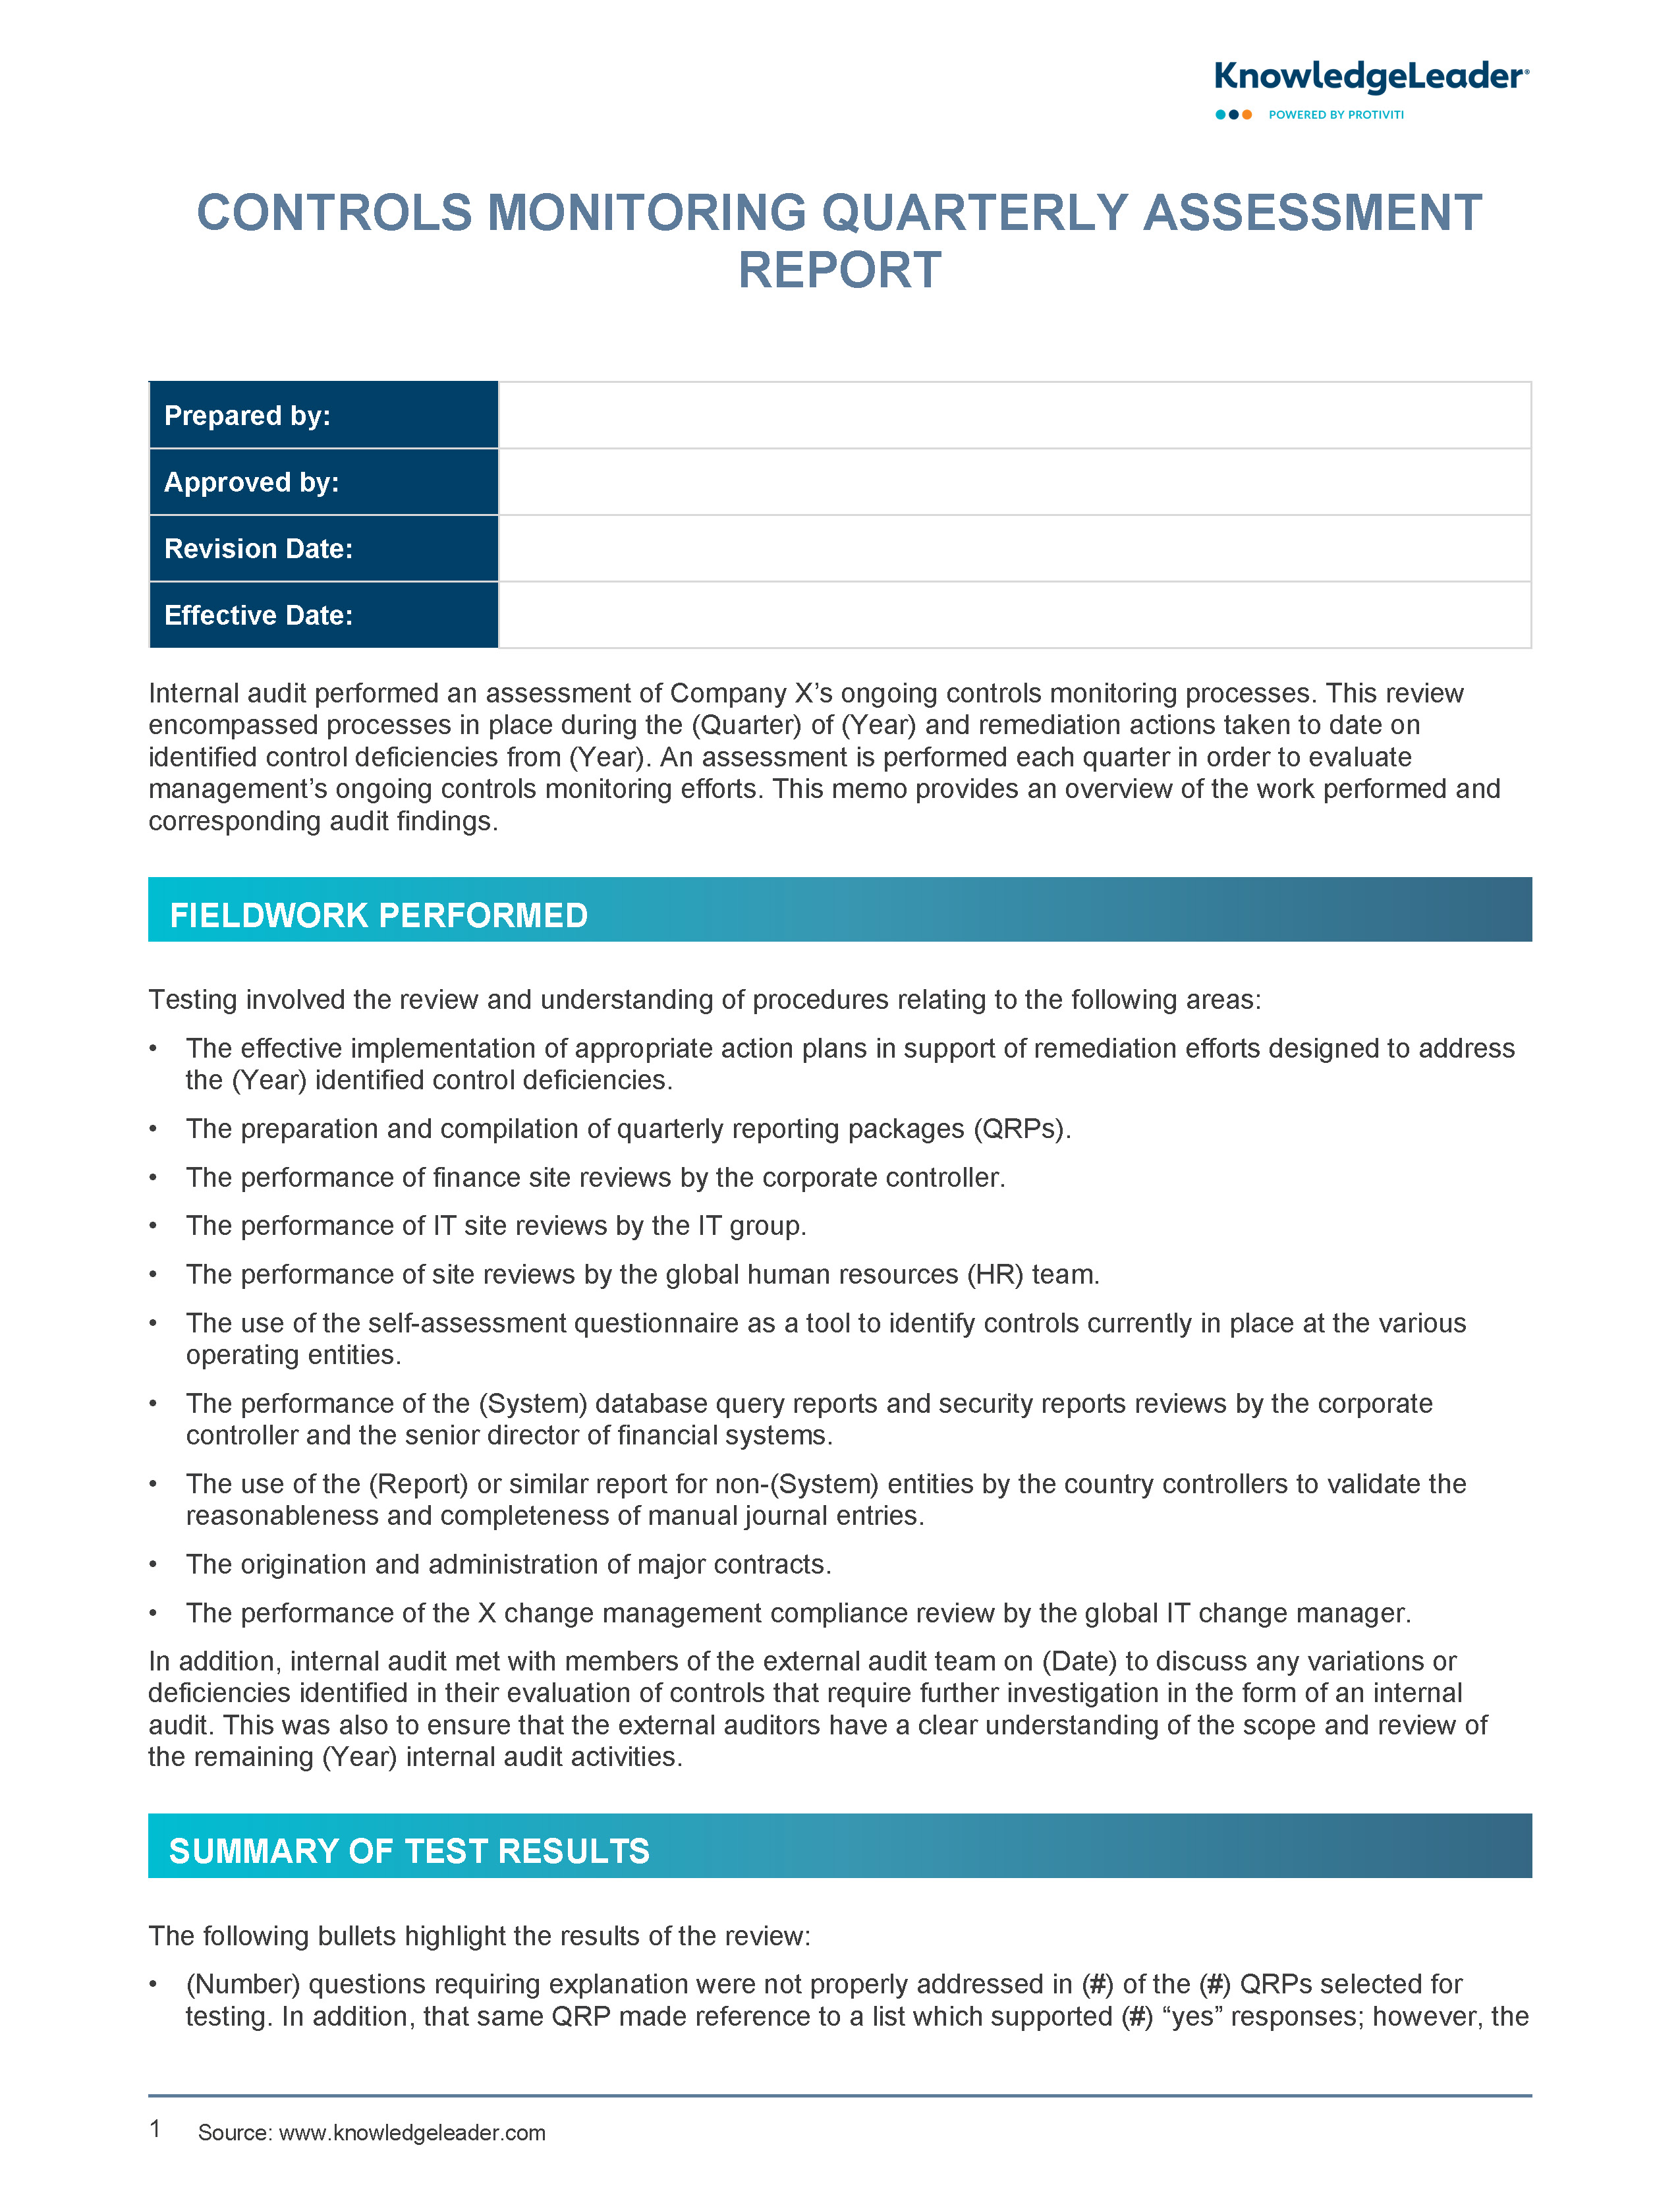 Screenshot of the first page of Controls Monitoring Quarterly Assessment Report